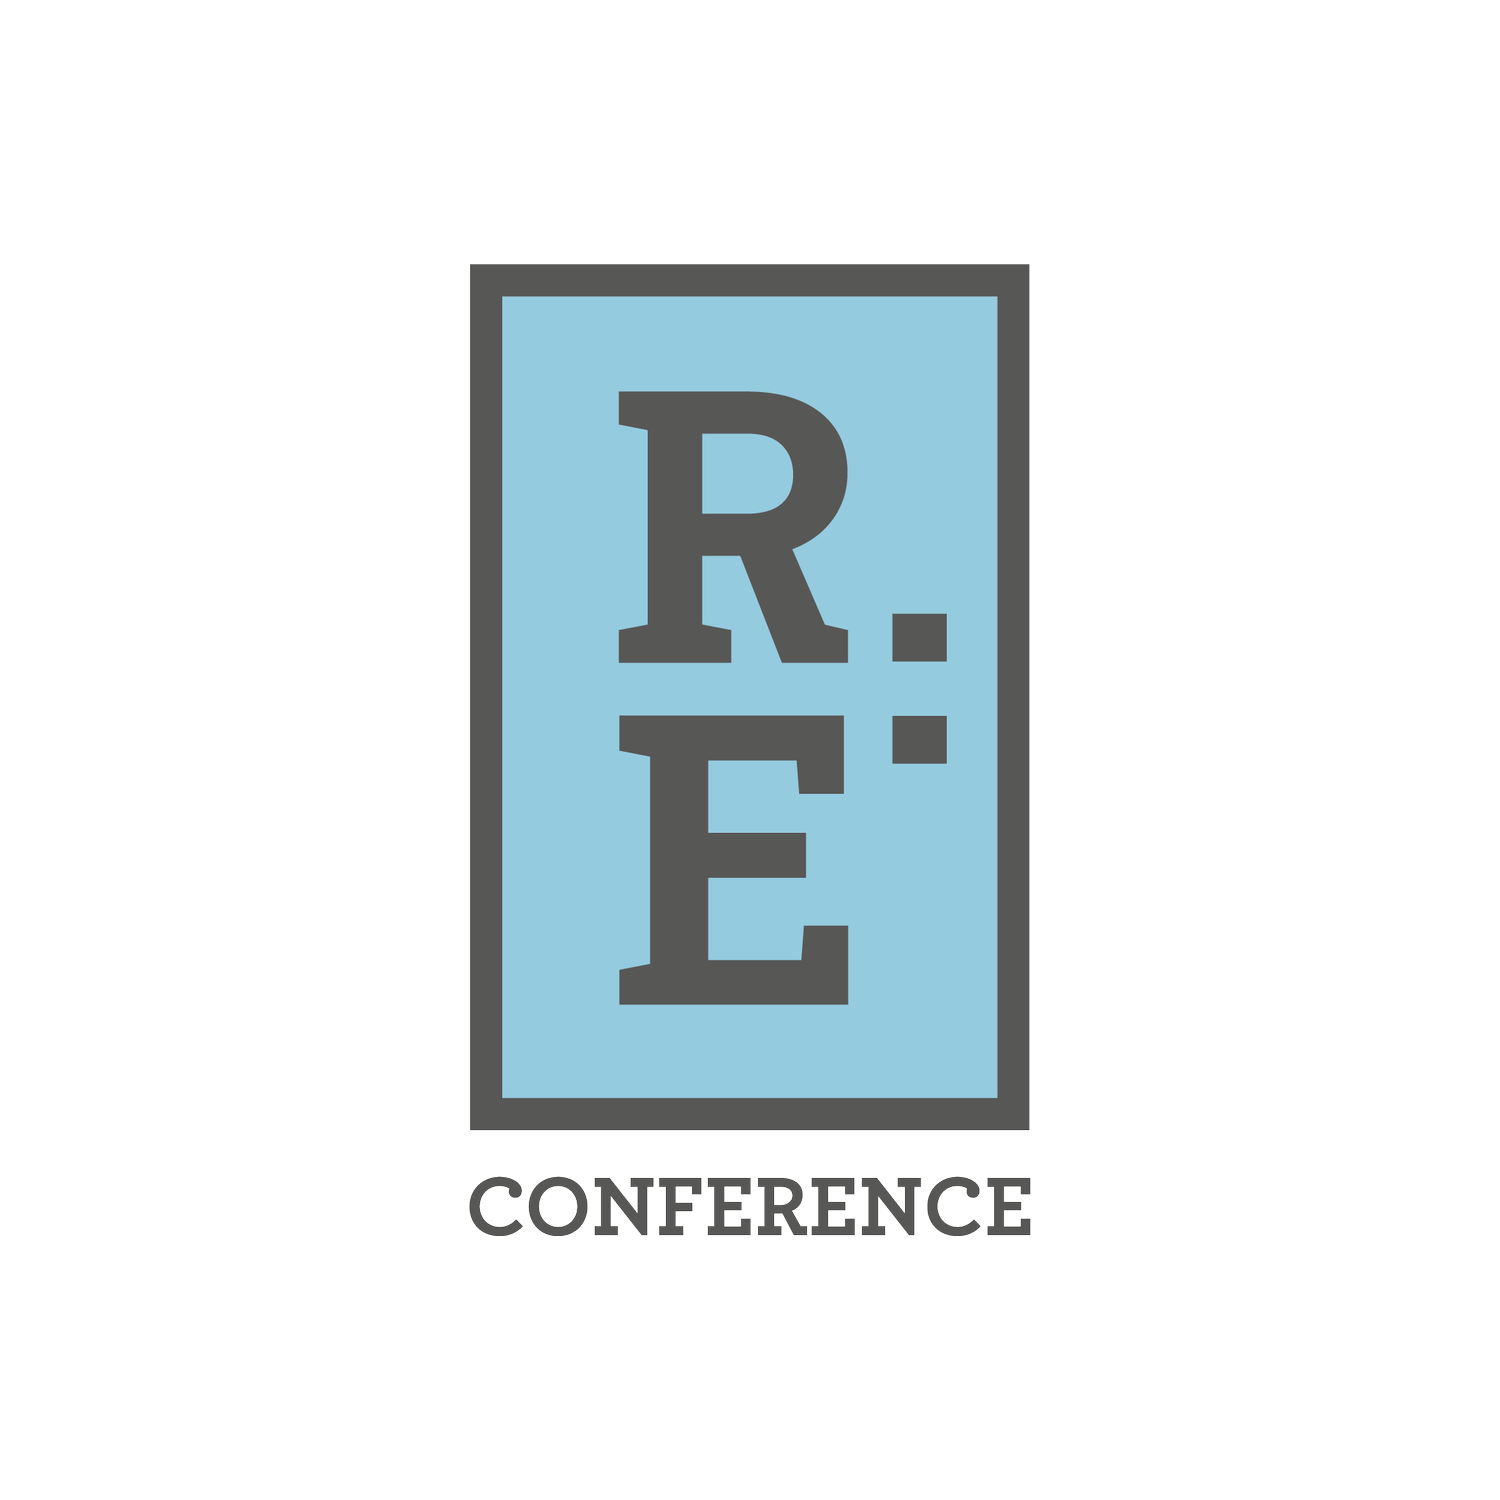 RE:Conference